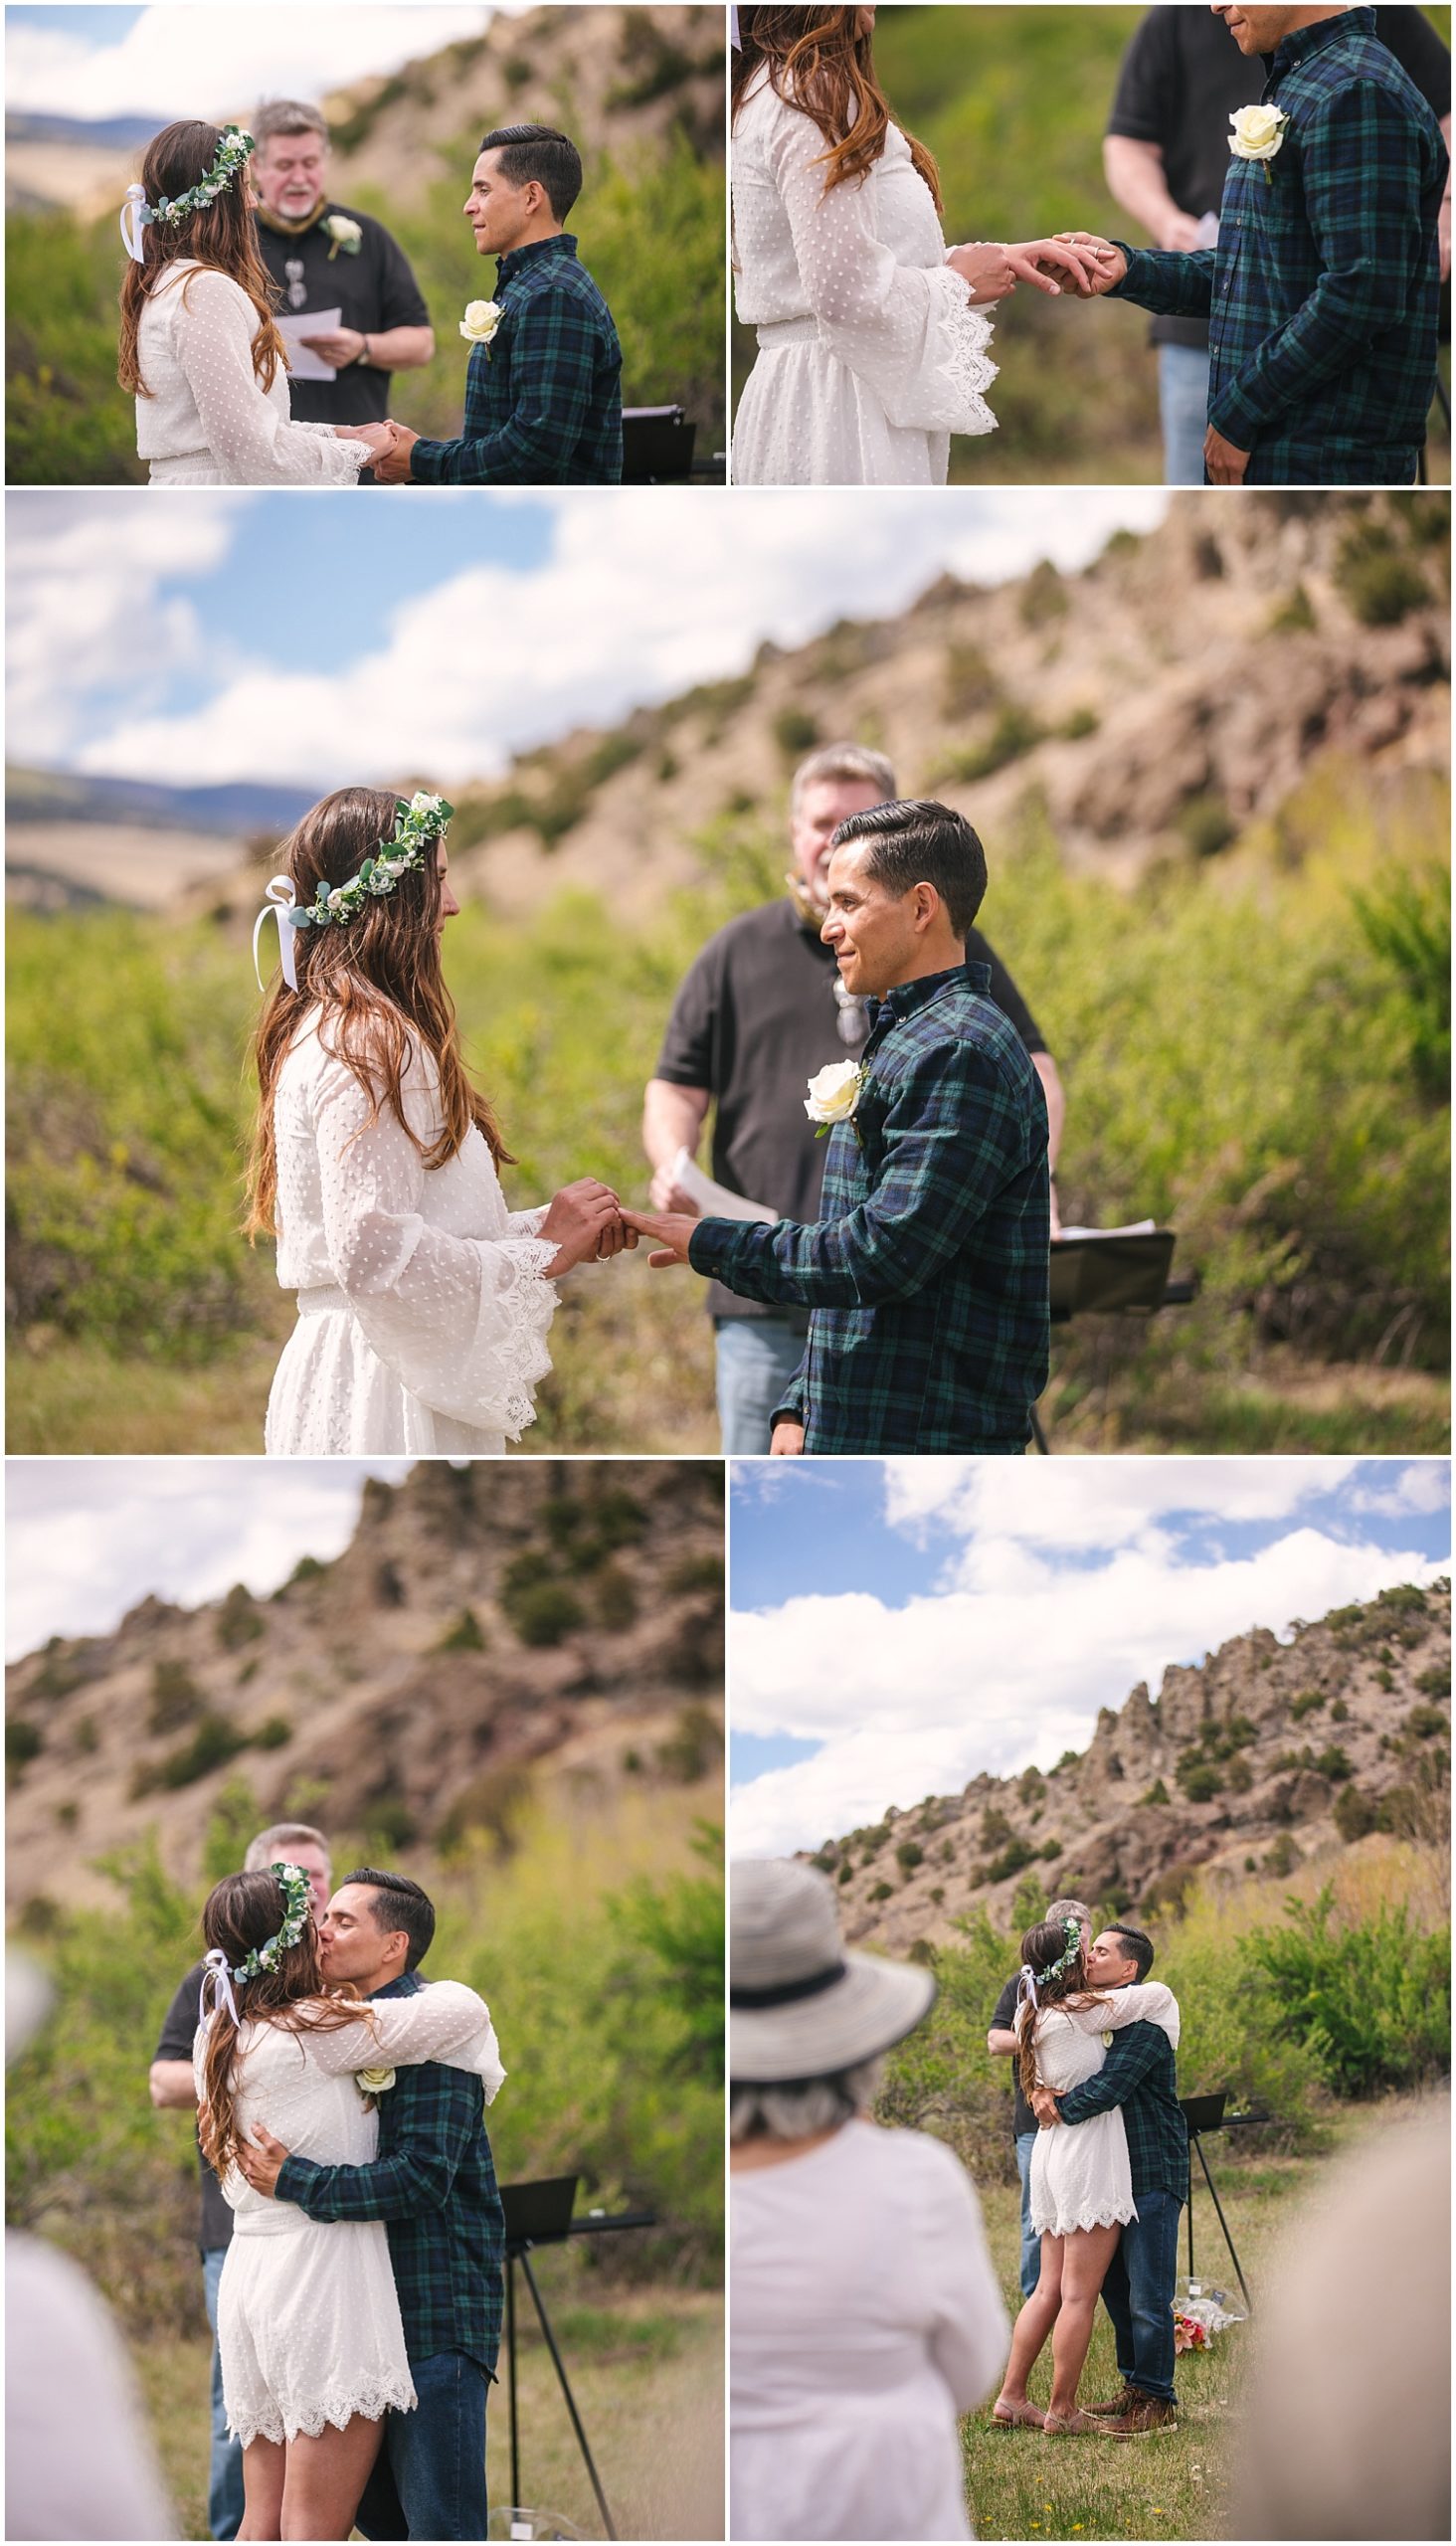 Bride and groom elope in the mountains of Colorado during coronavirus